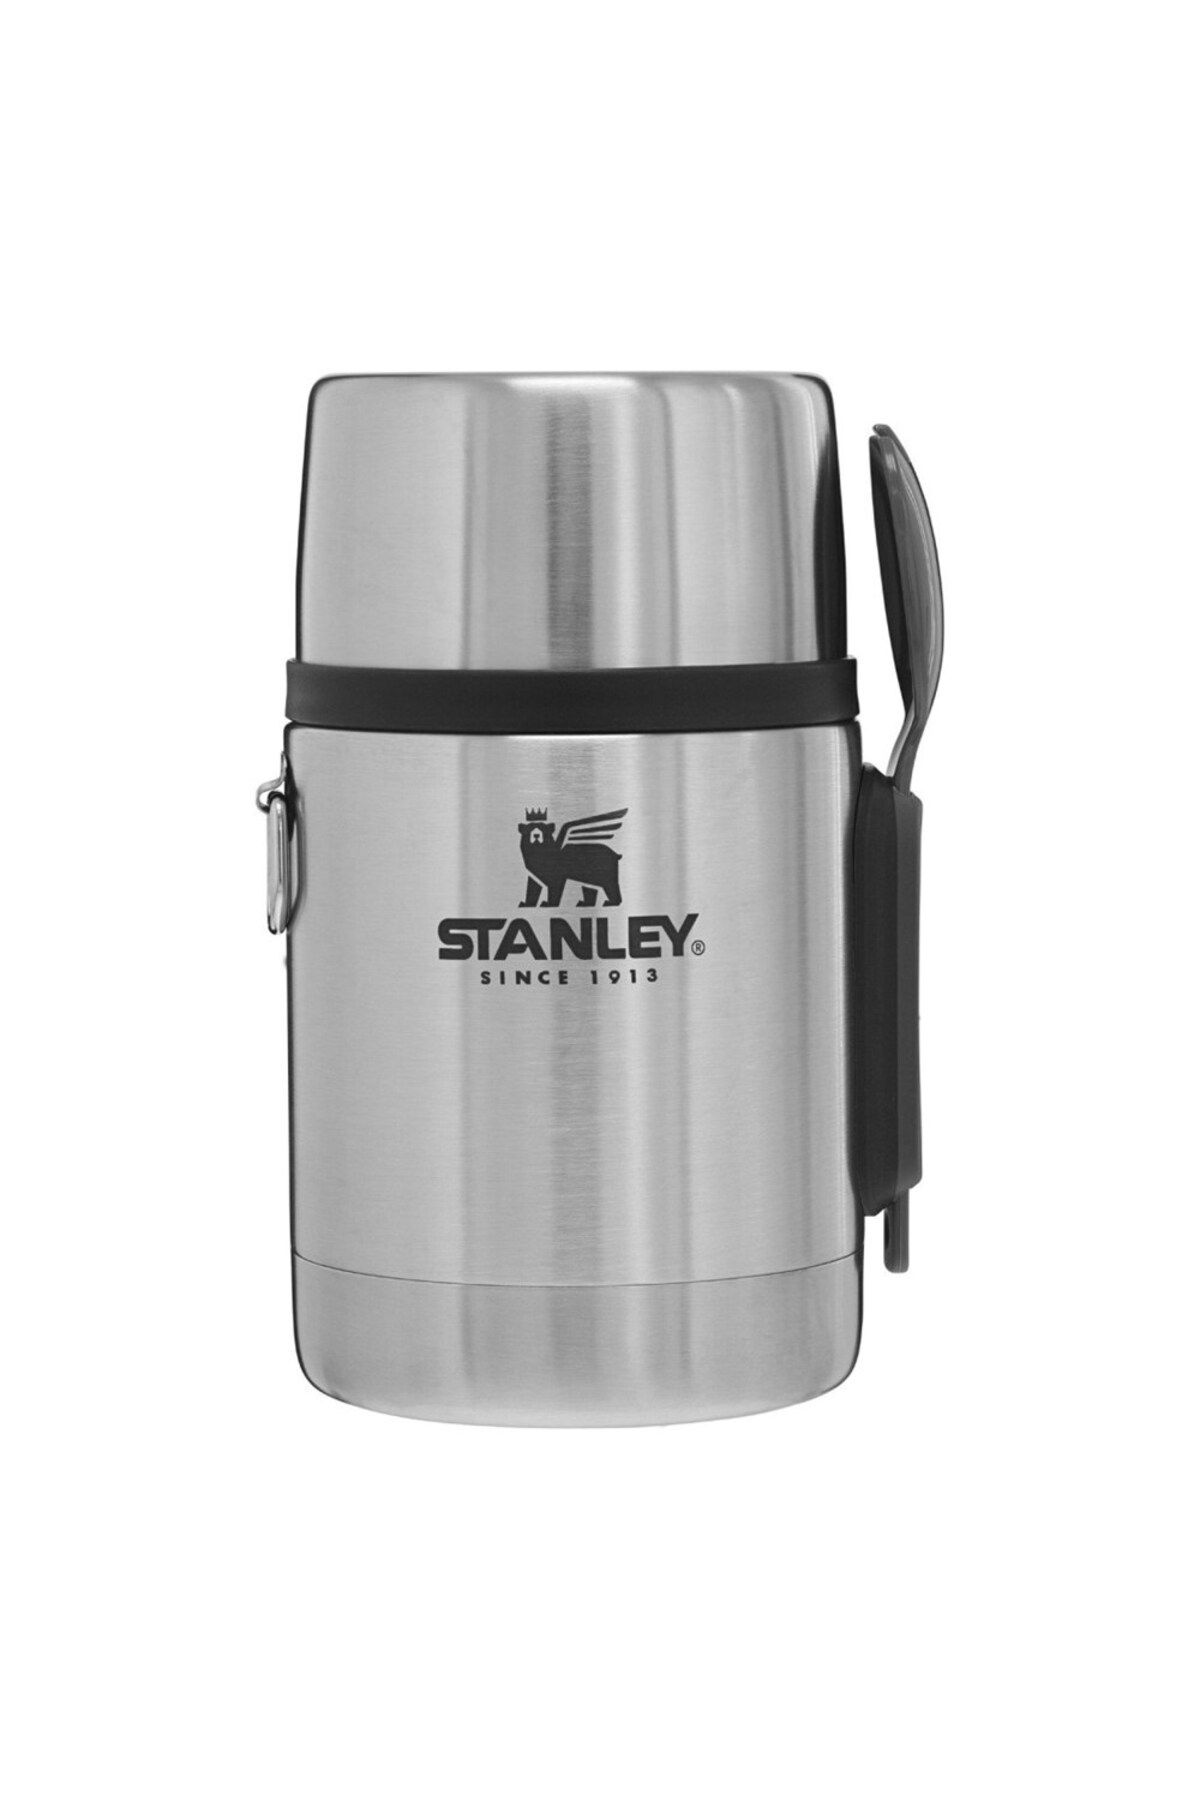 Stanley 10-01287-032 Stainless Steel